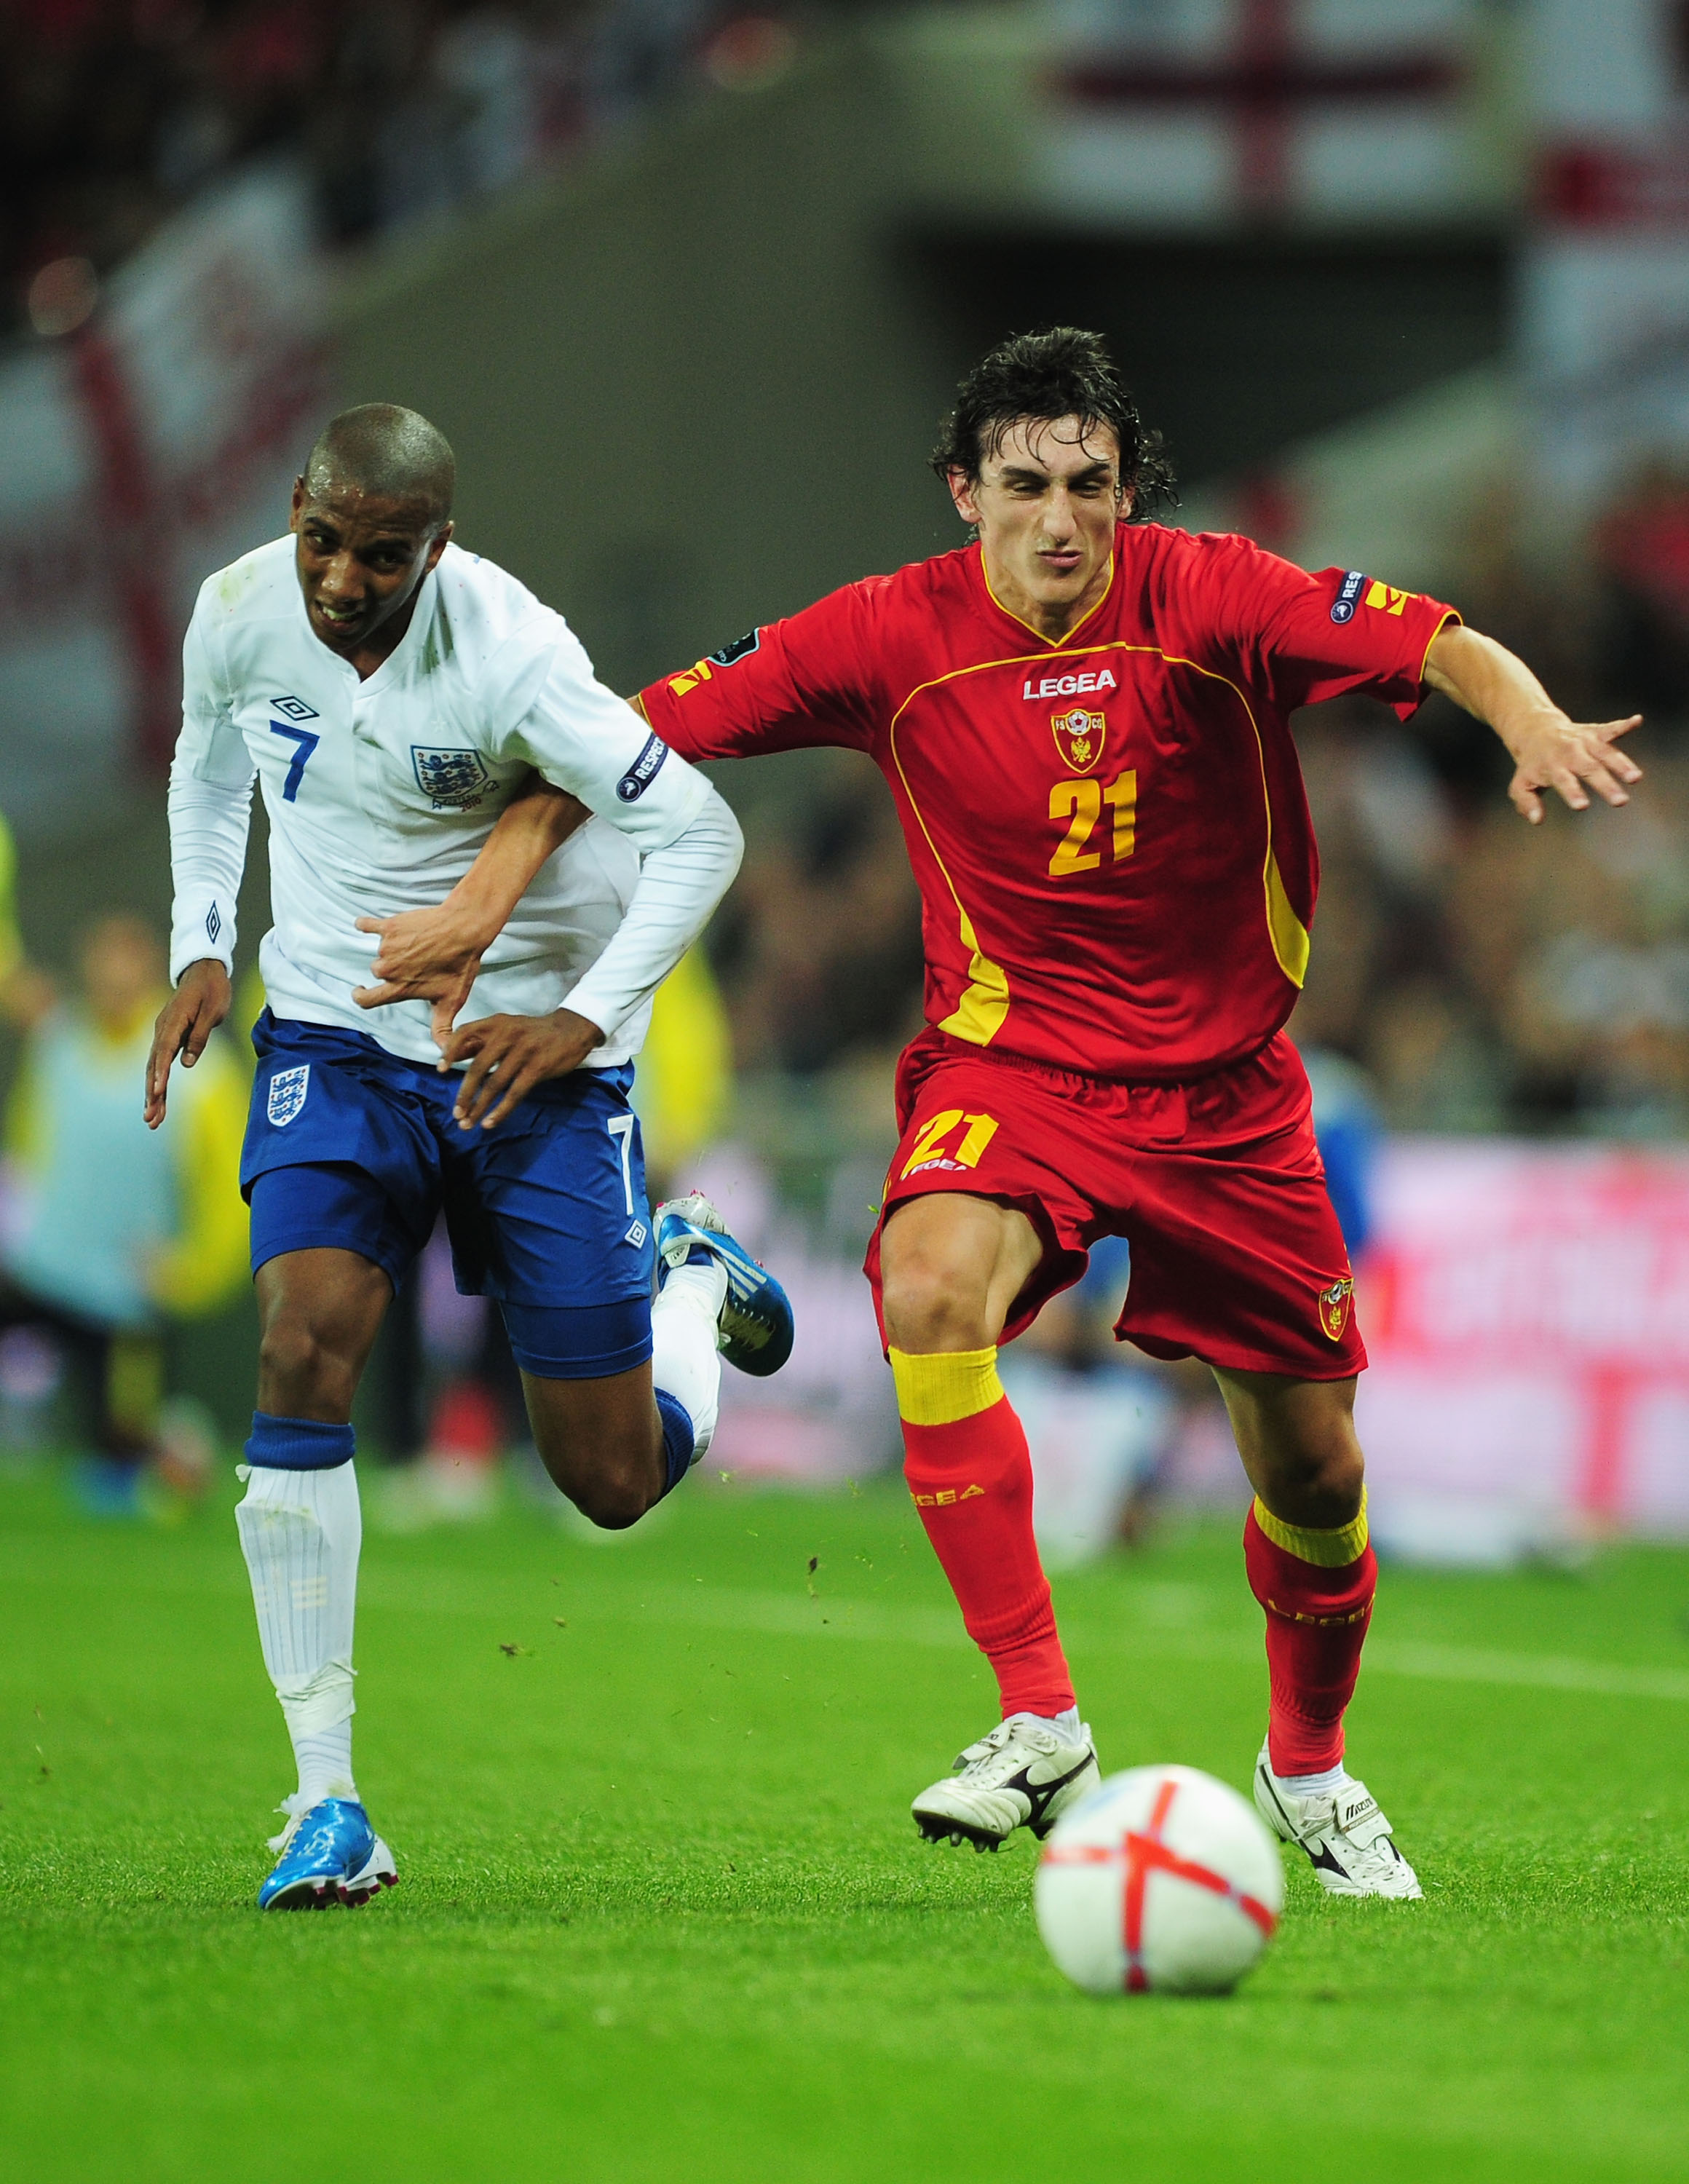 LONDON, ENGLAND - OCTOBER 12:  Ashley Young of England and Stefan Savic of Montenegro battle for the ball during the UEFA EURO 2012 Group G Qualifying match between England and Montenegro at Wembley Stadium on October 12, 2010 in London, England.  (Photo